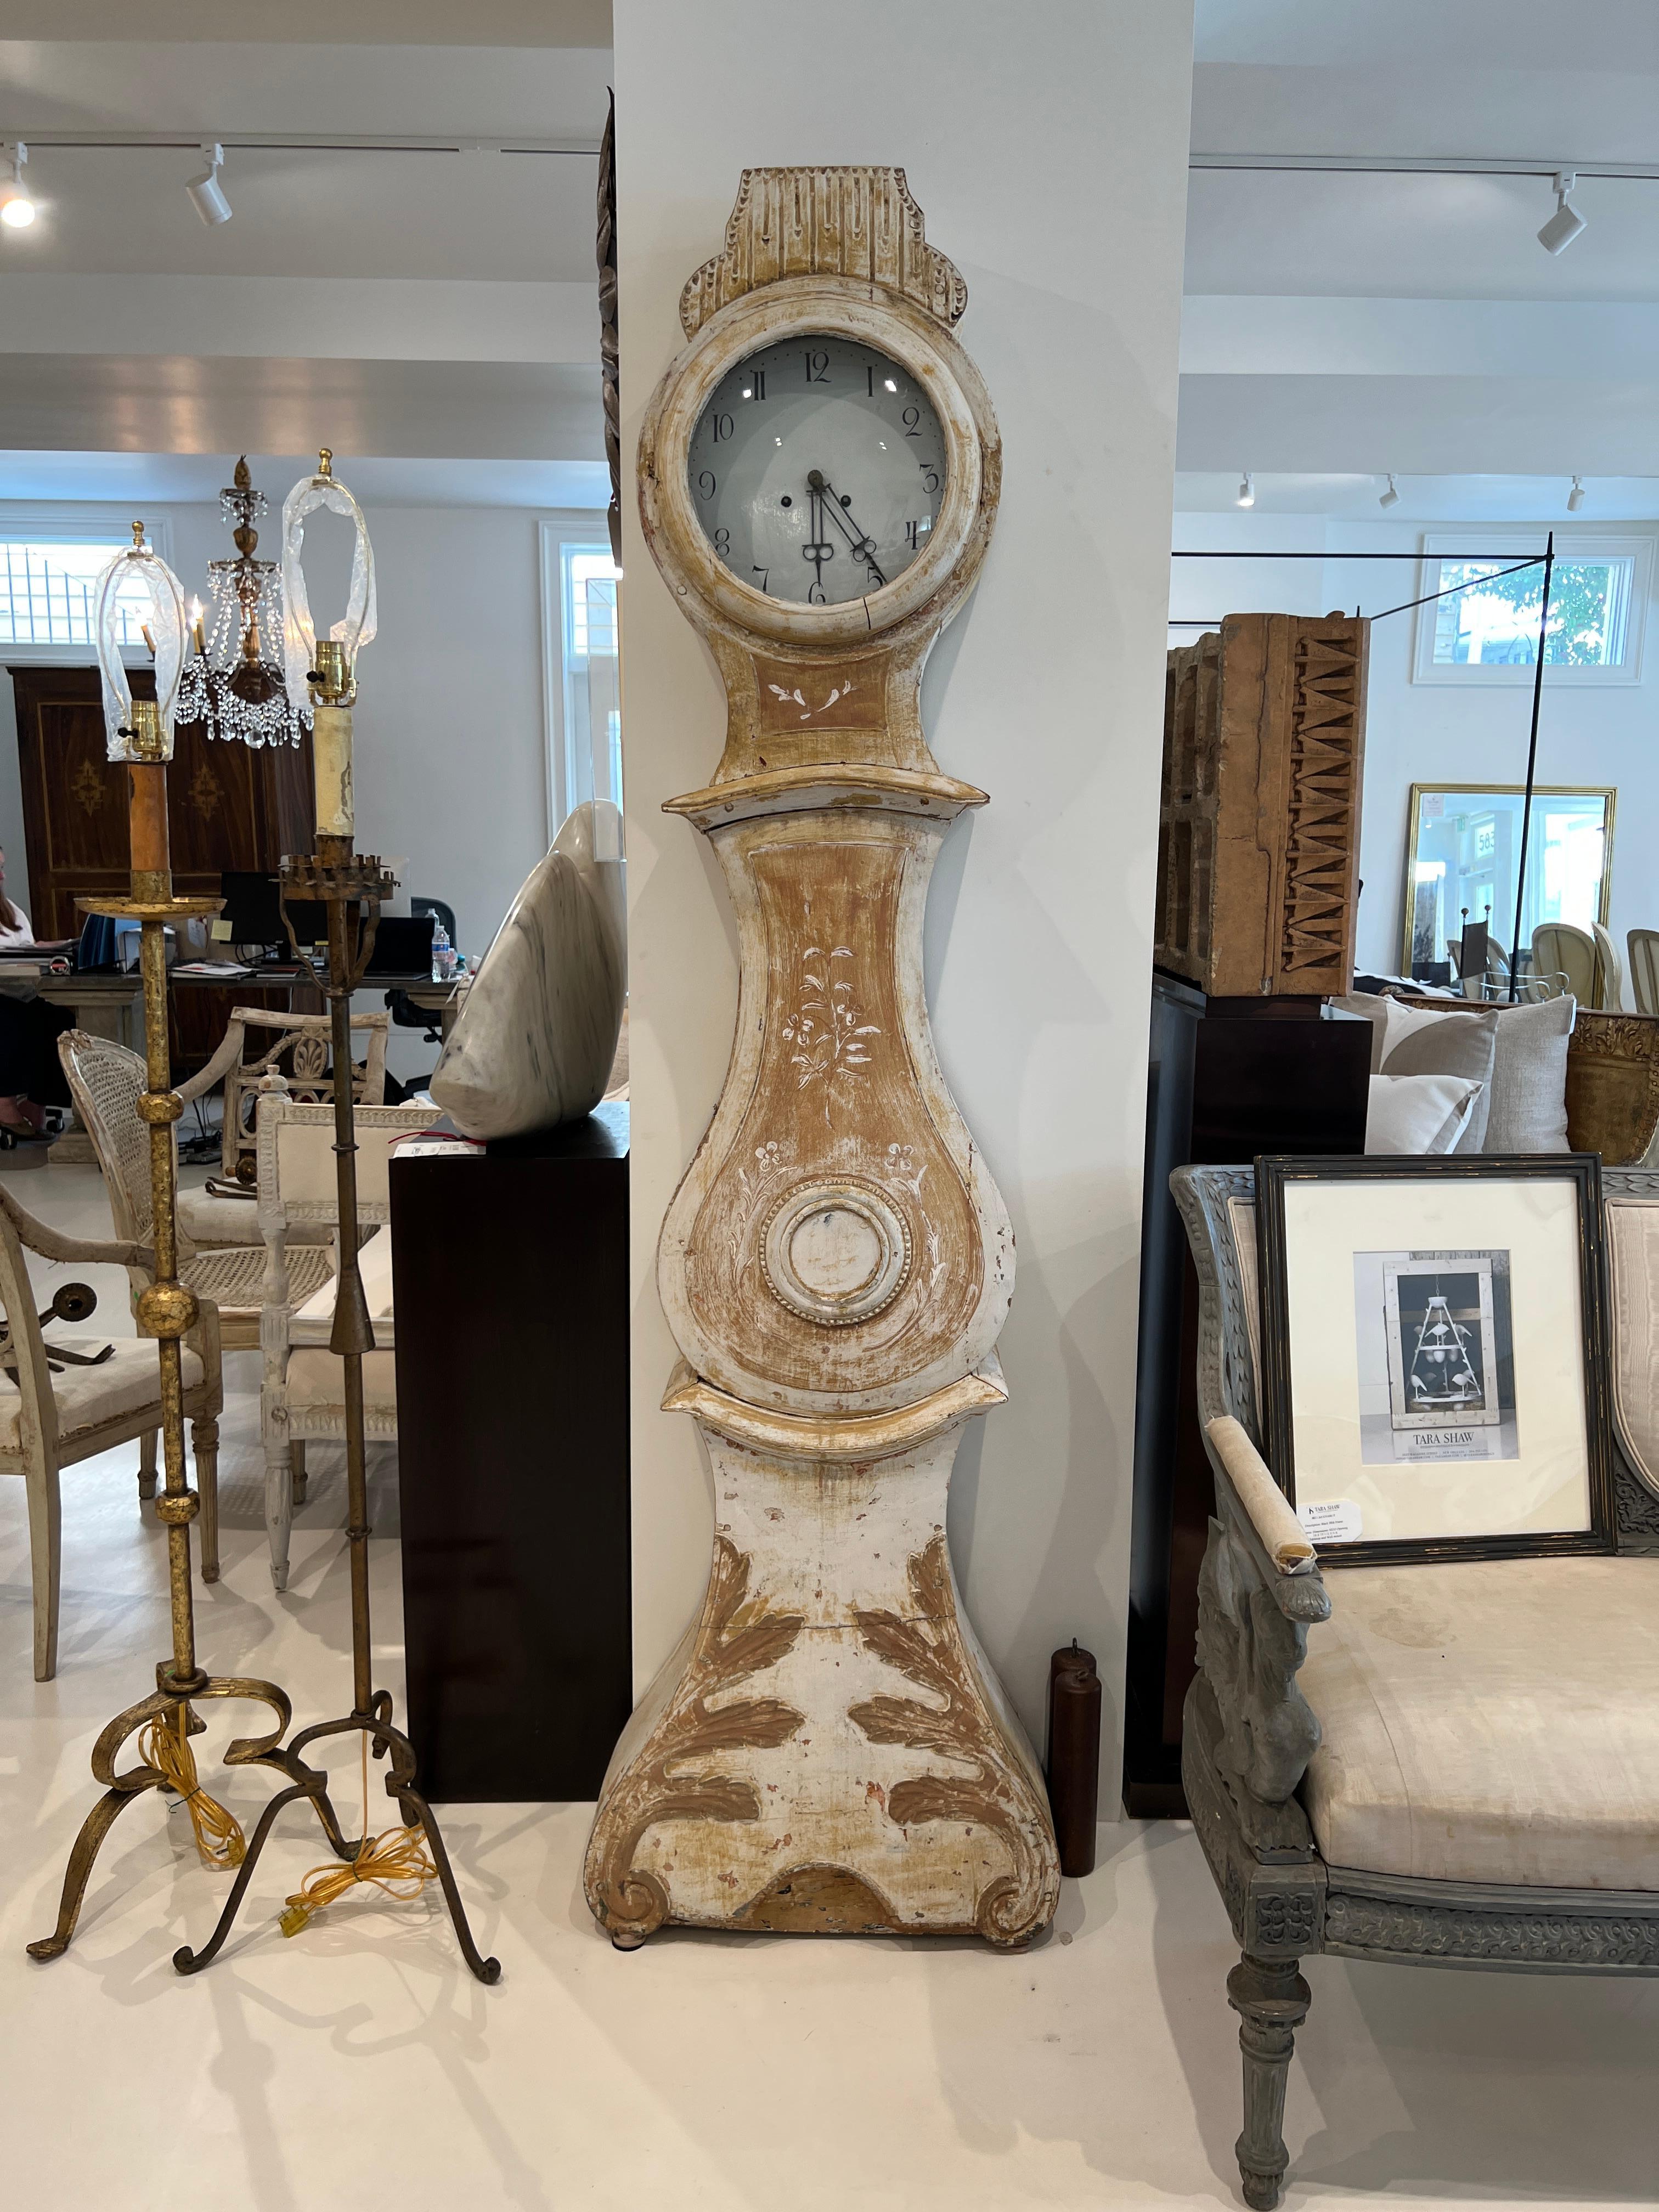 Swedish Mora Clock with stylish carving from the early 19th century - painted. Not functional for keeping time but beautiful addition to a space.